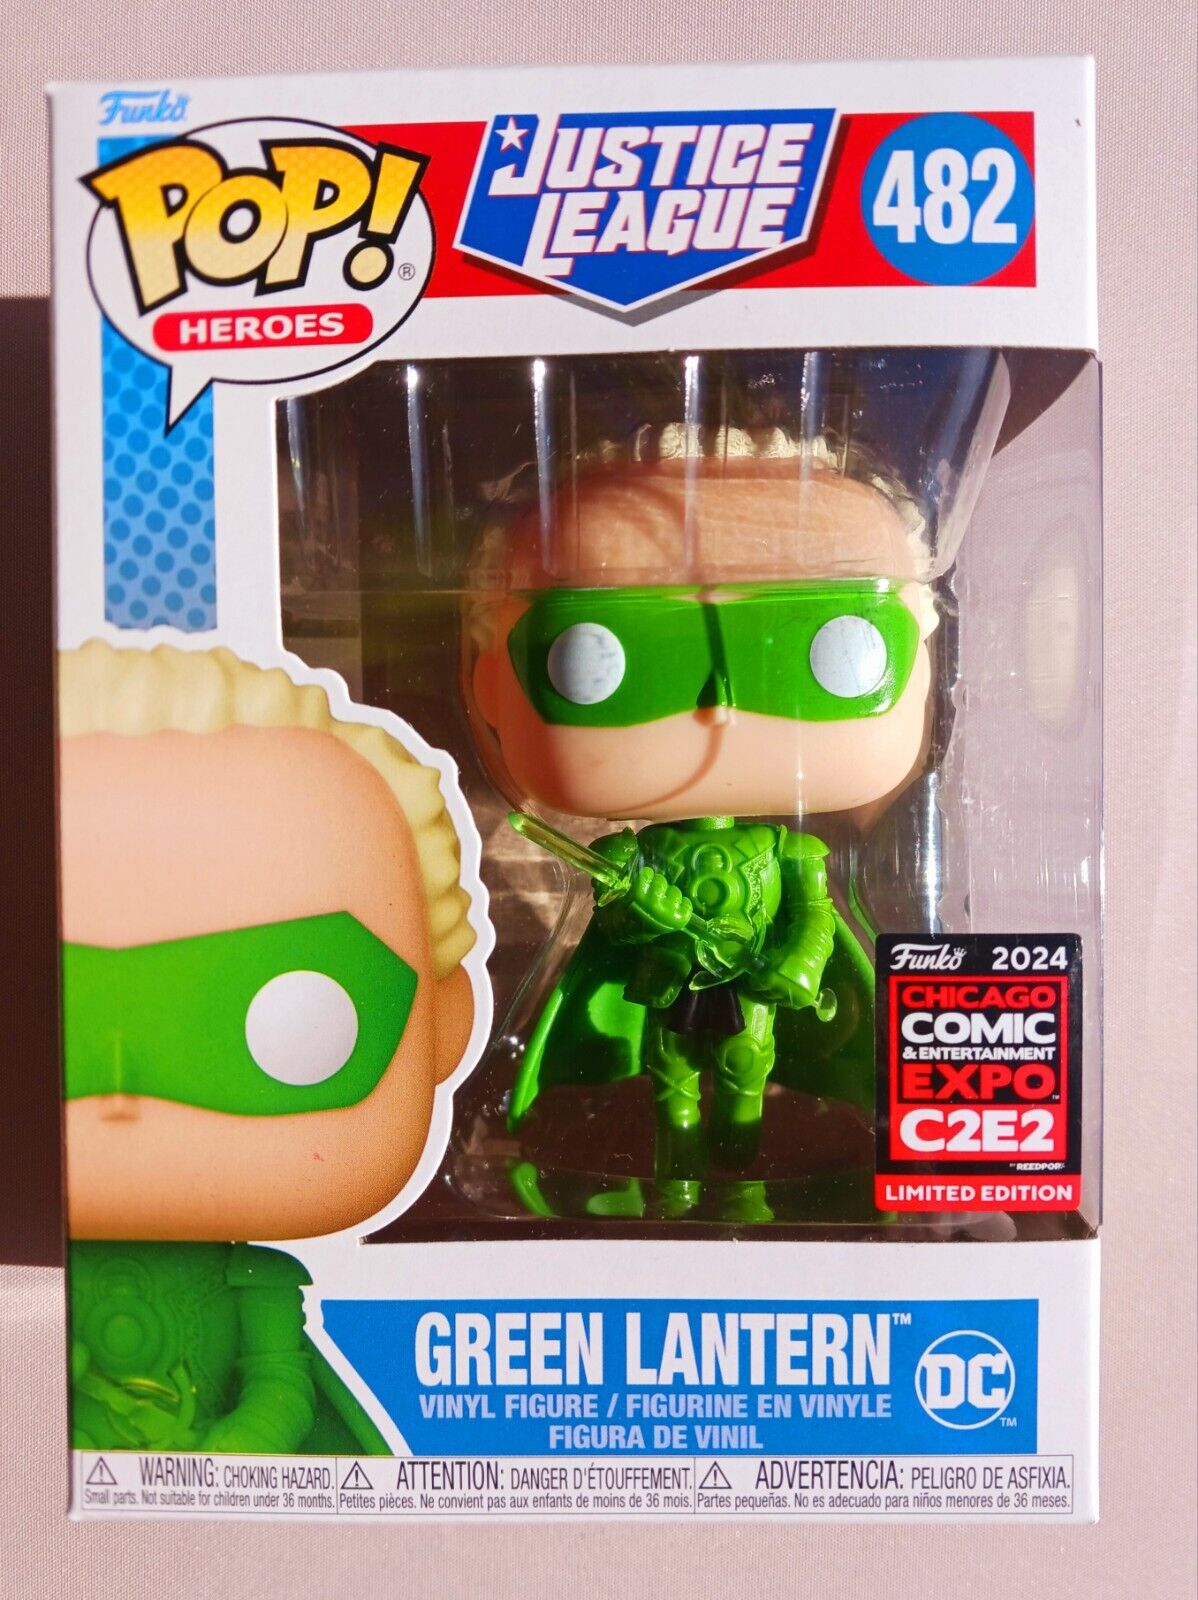 Funko Pop Justice League Green Lantern #482 Official C2E2 2024 Limited Edition 